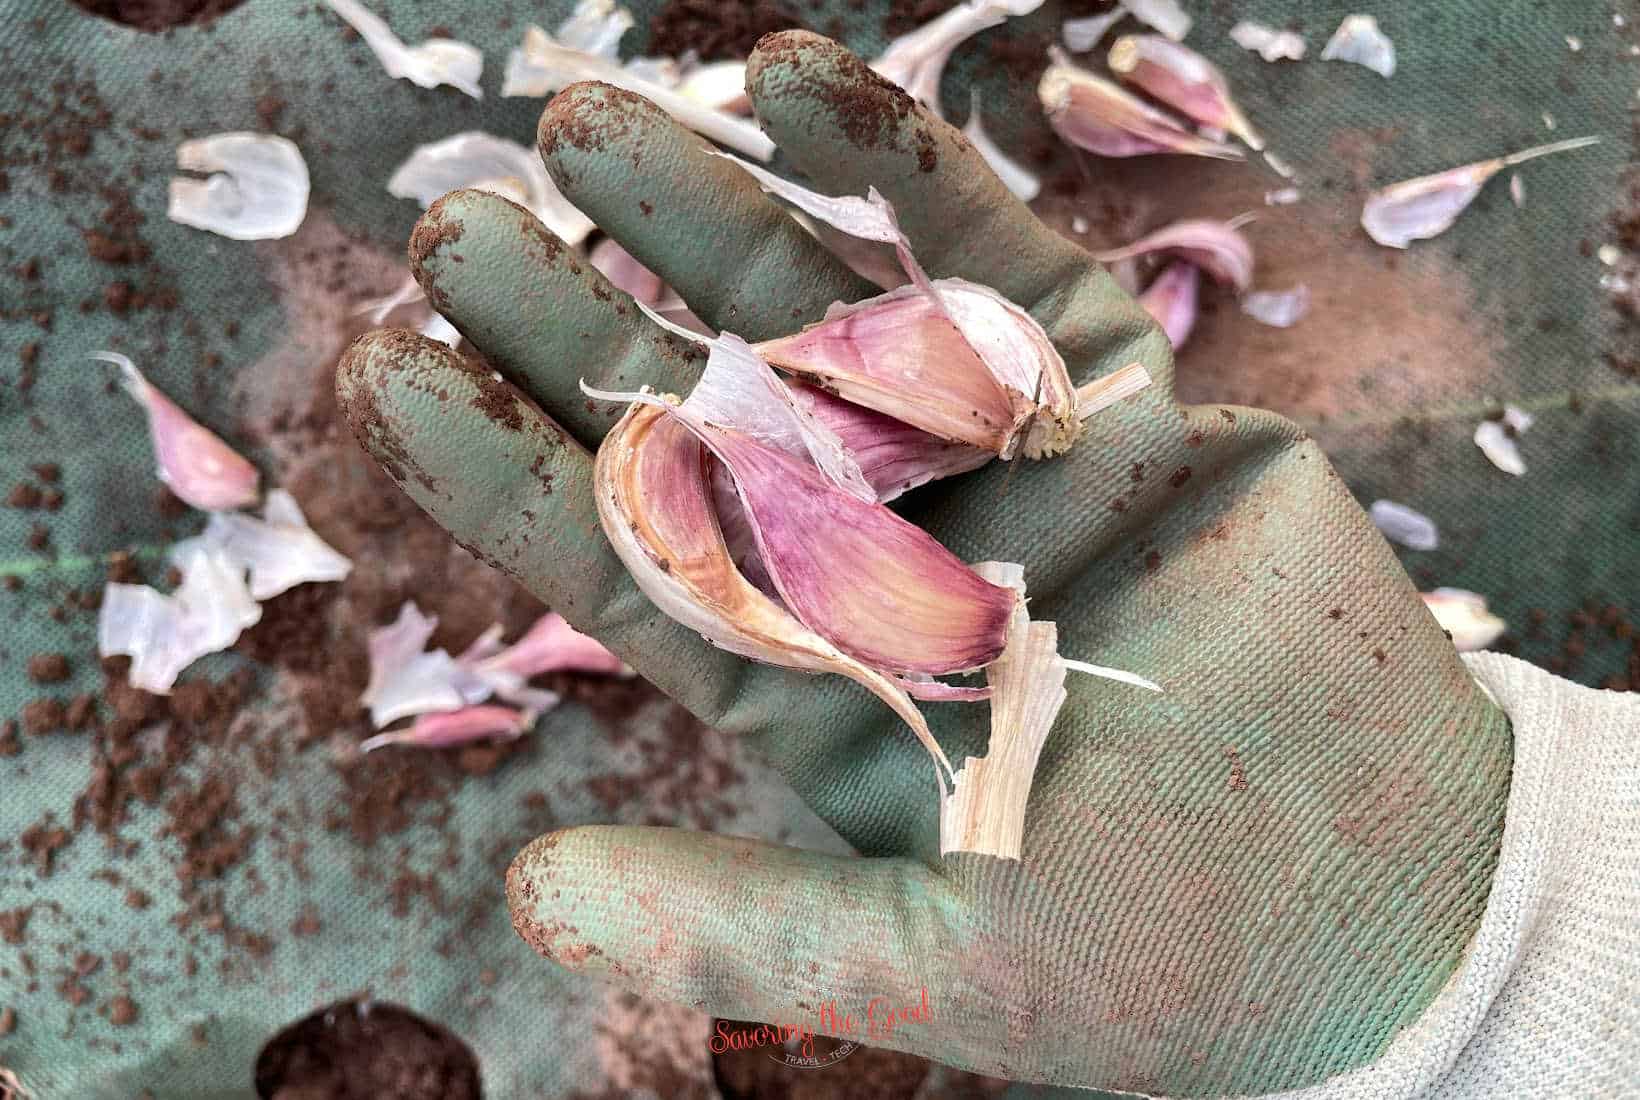 4 cloves of garlic cloves in a gloved hand ready to be planted